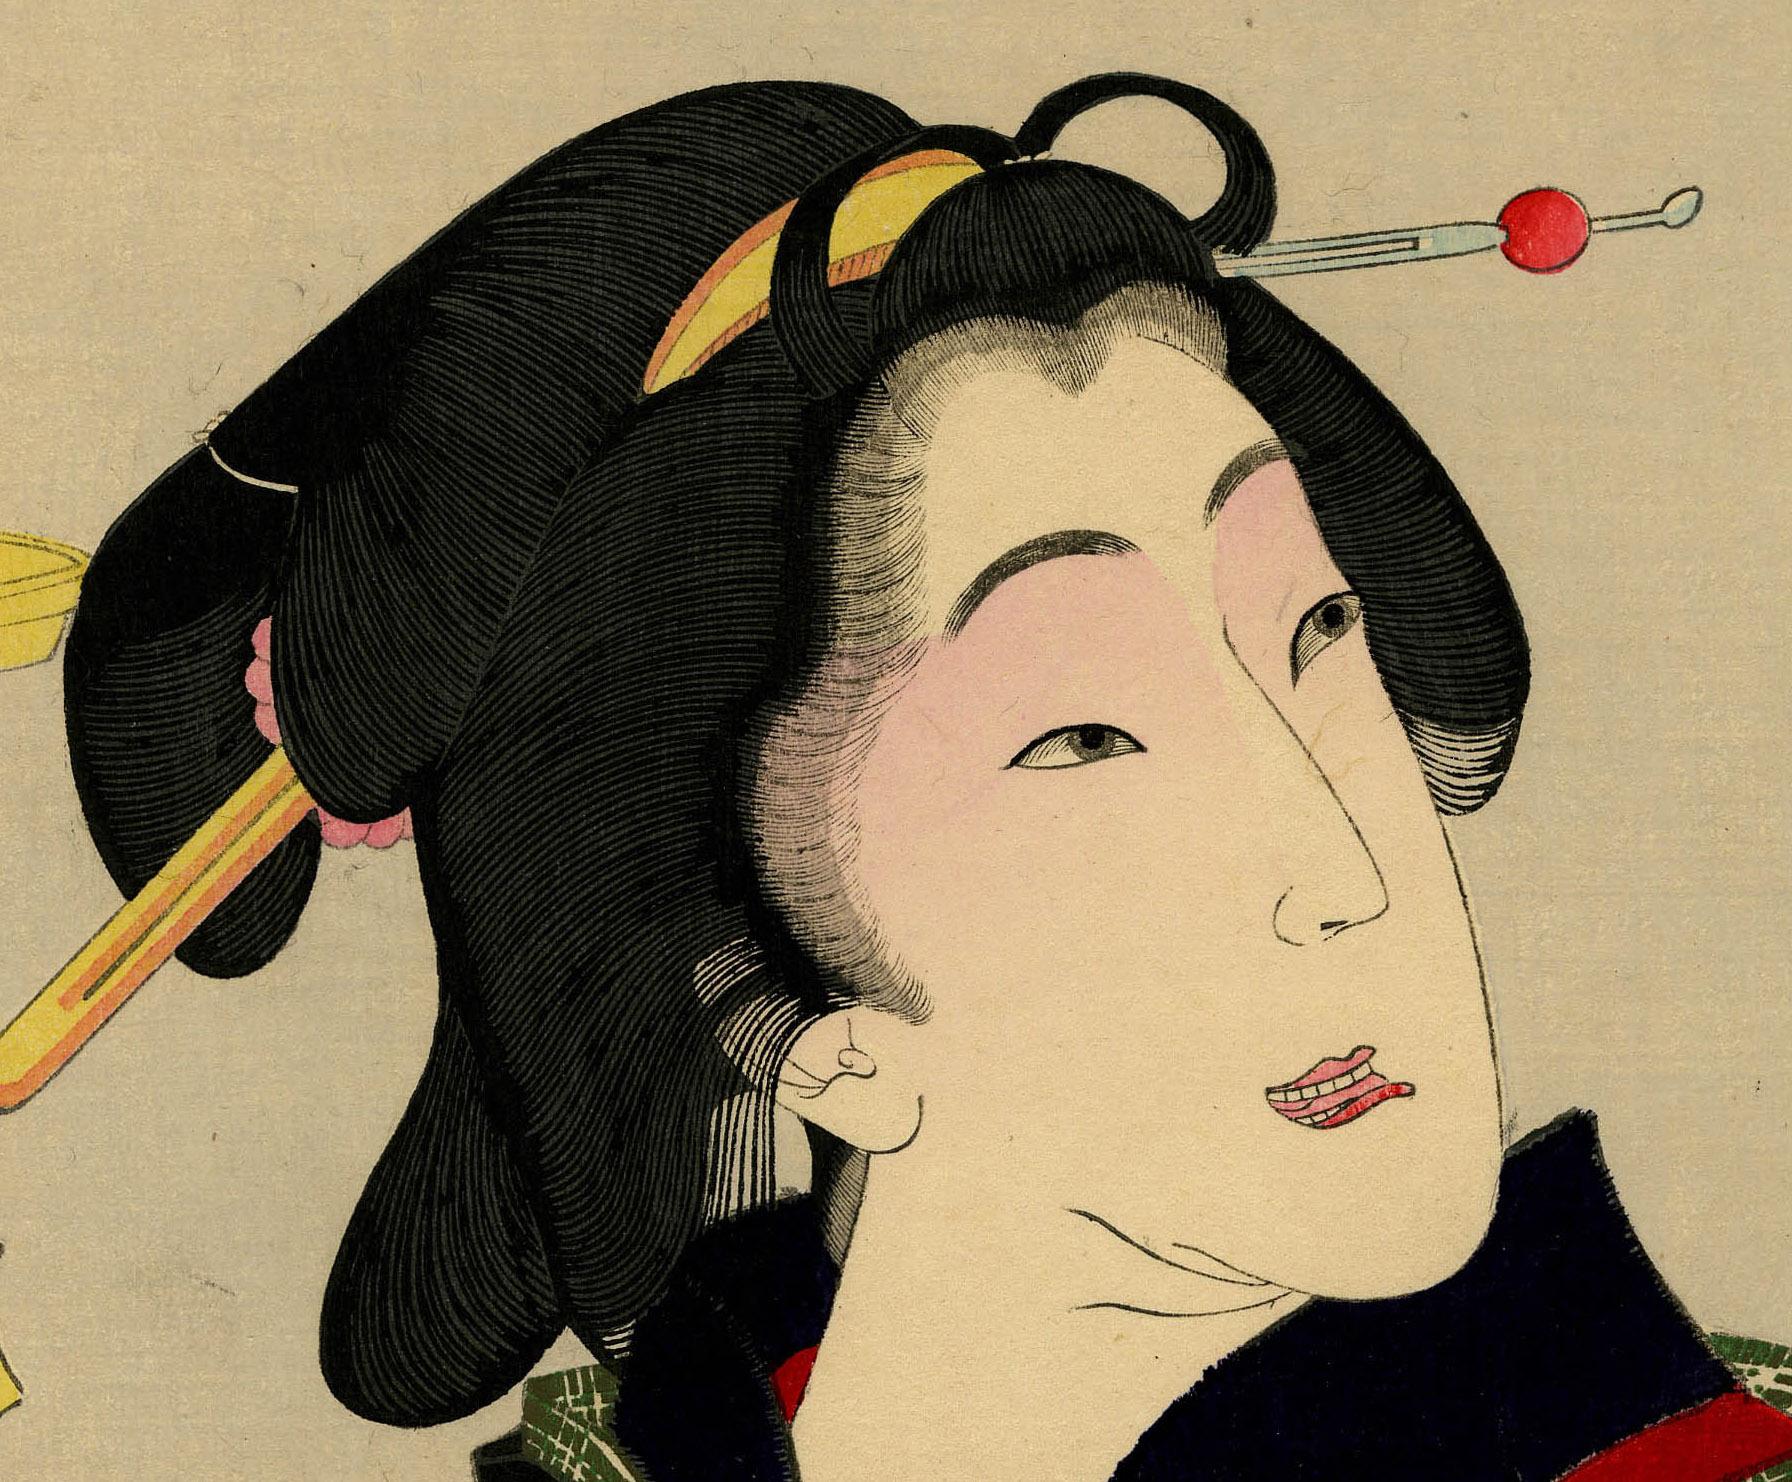 Thirsty: The Appearance of a Town Geisha - a So-Called Wine- Server - in der Anse – Print von Taiso Yoshitoshi